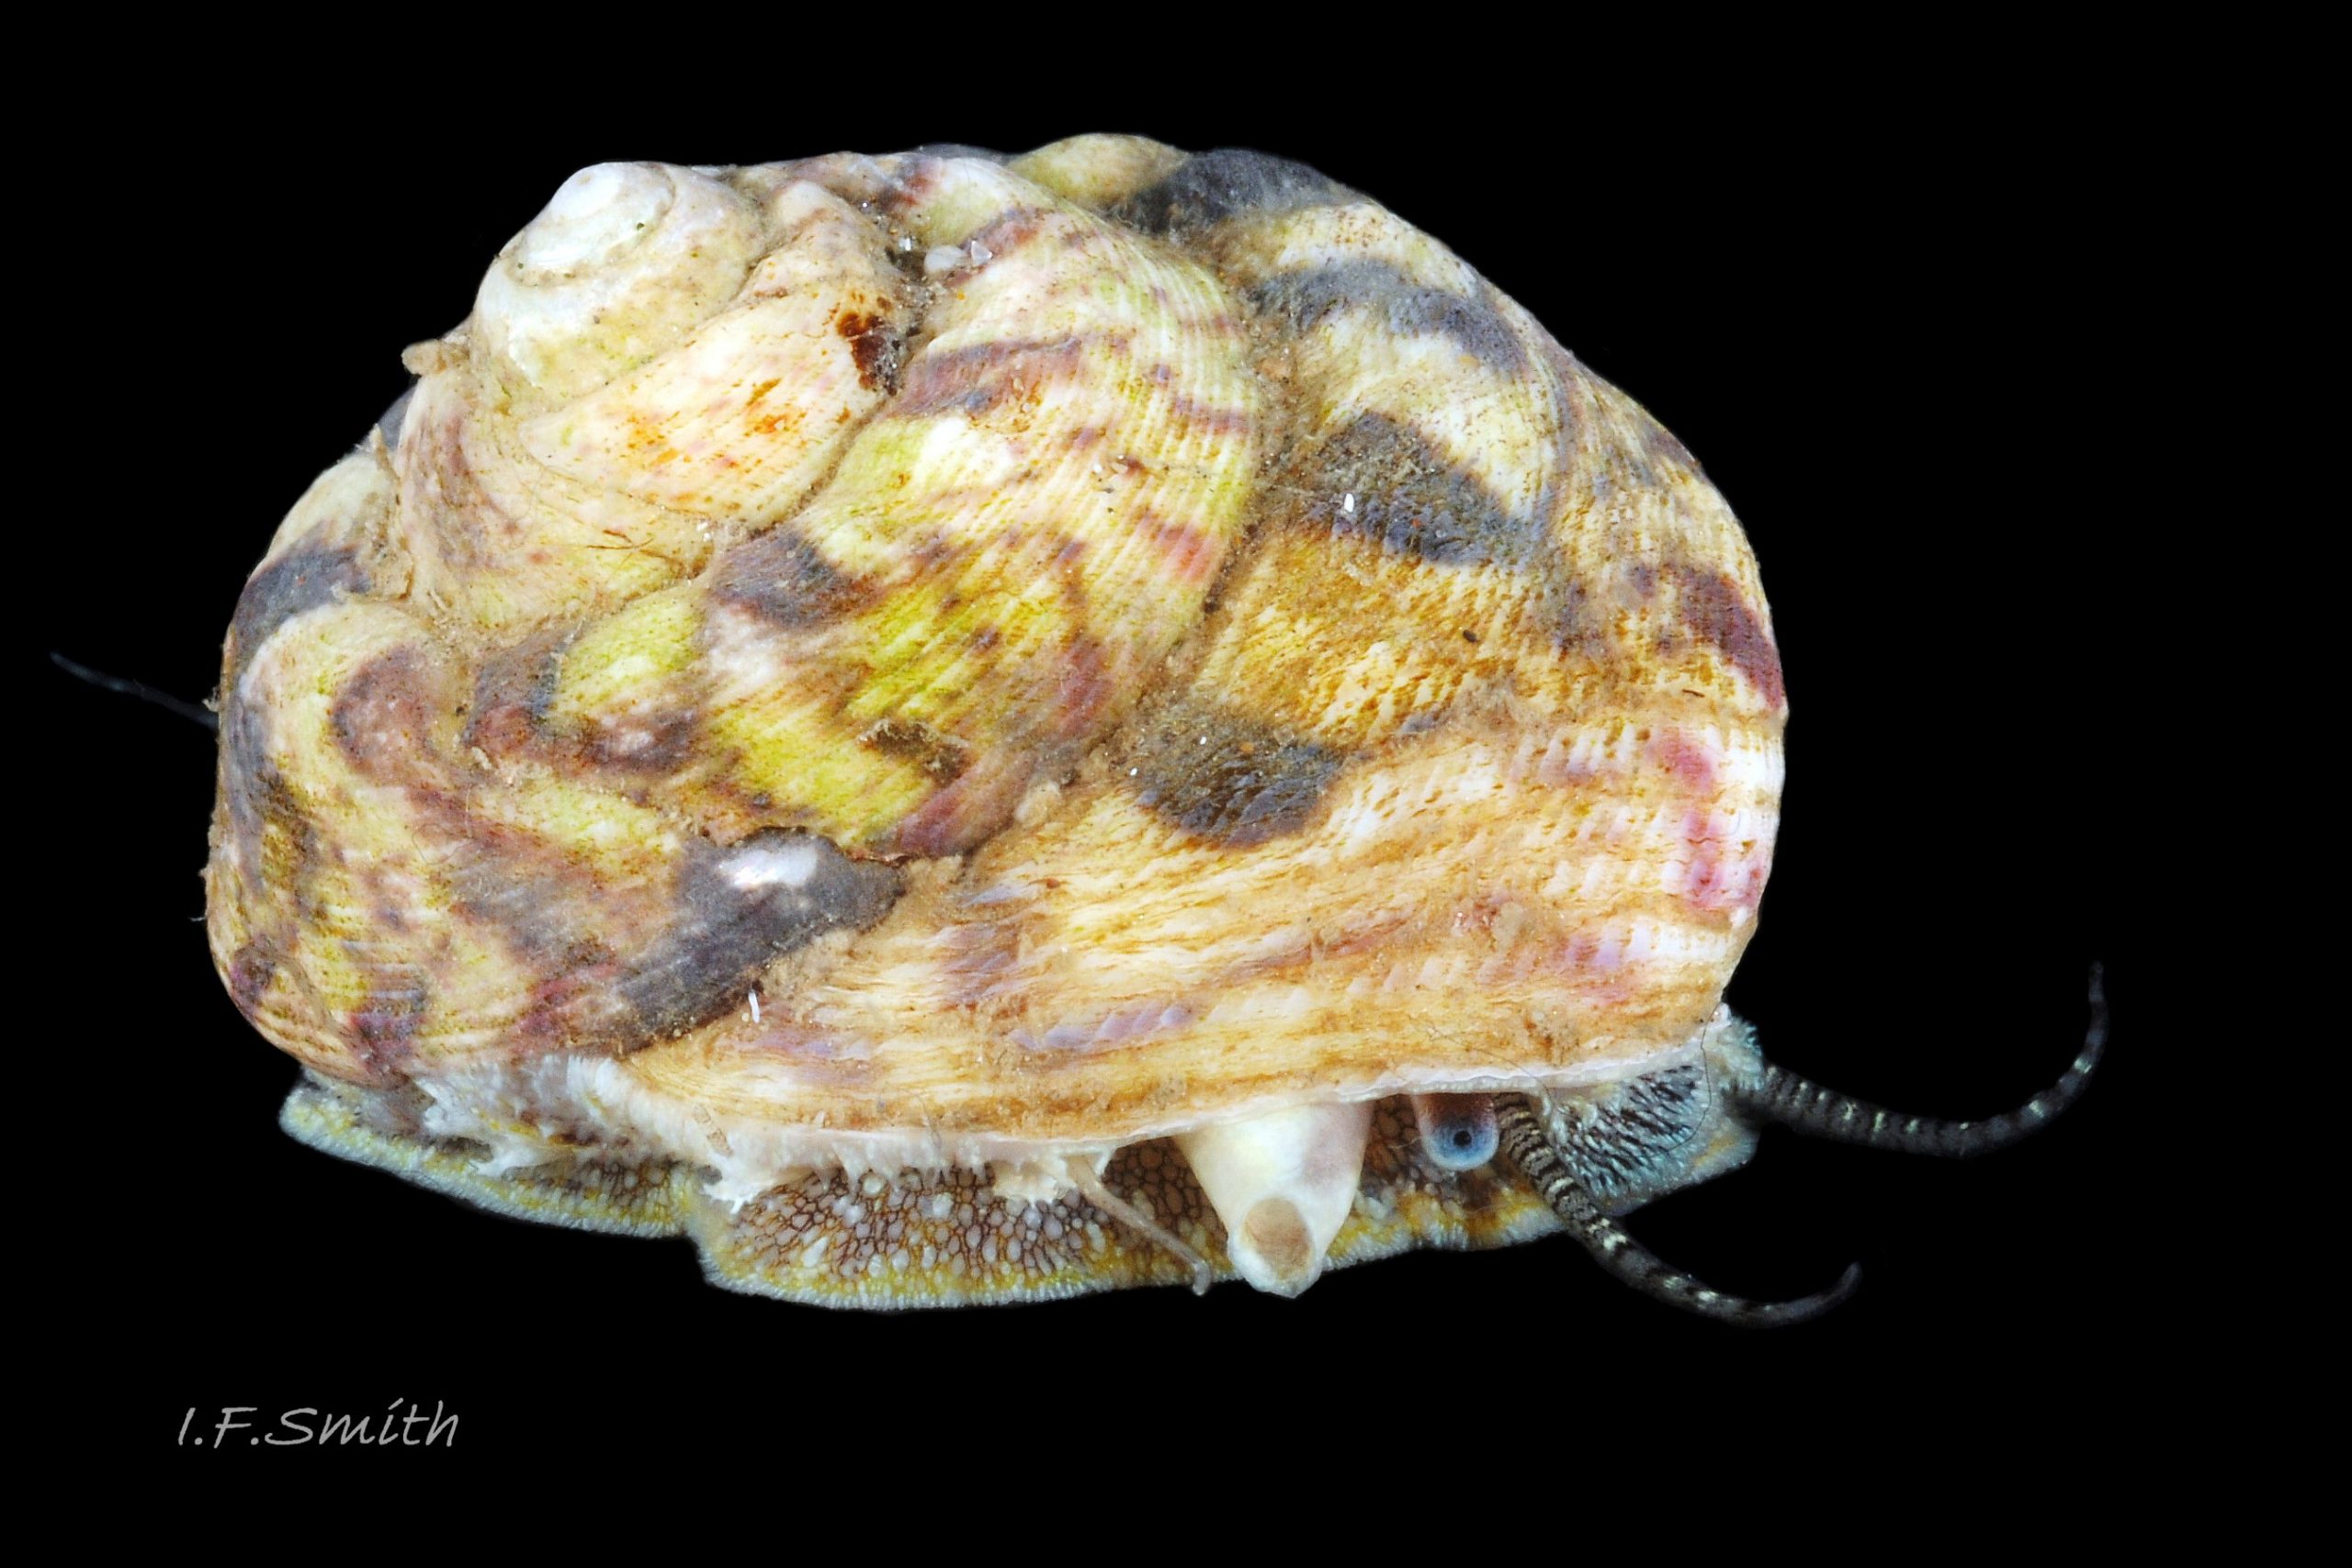 26 Gibbula magus. Height 19mm, breadth 25mm. Cardigan Bay, Wales. 2015.